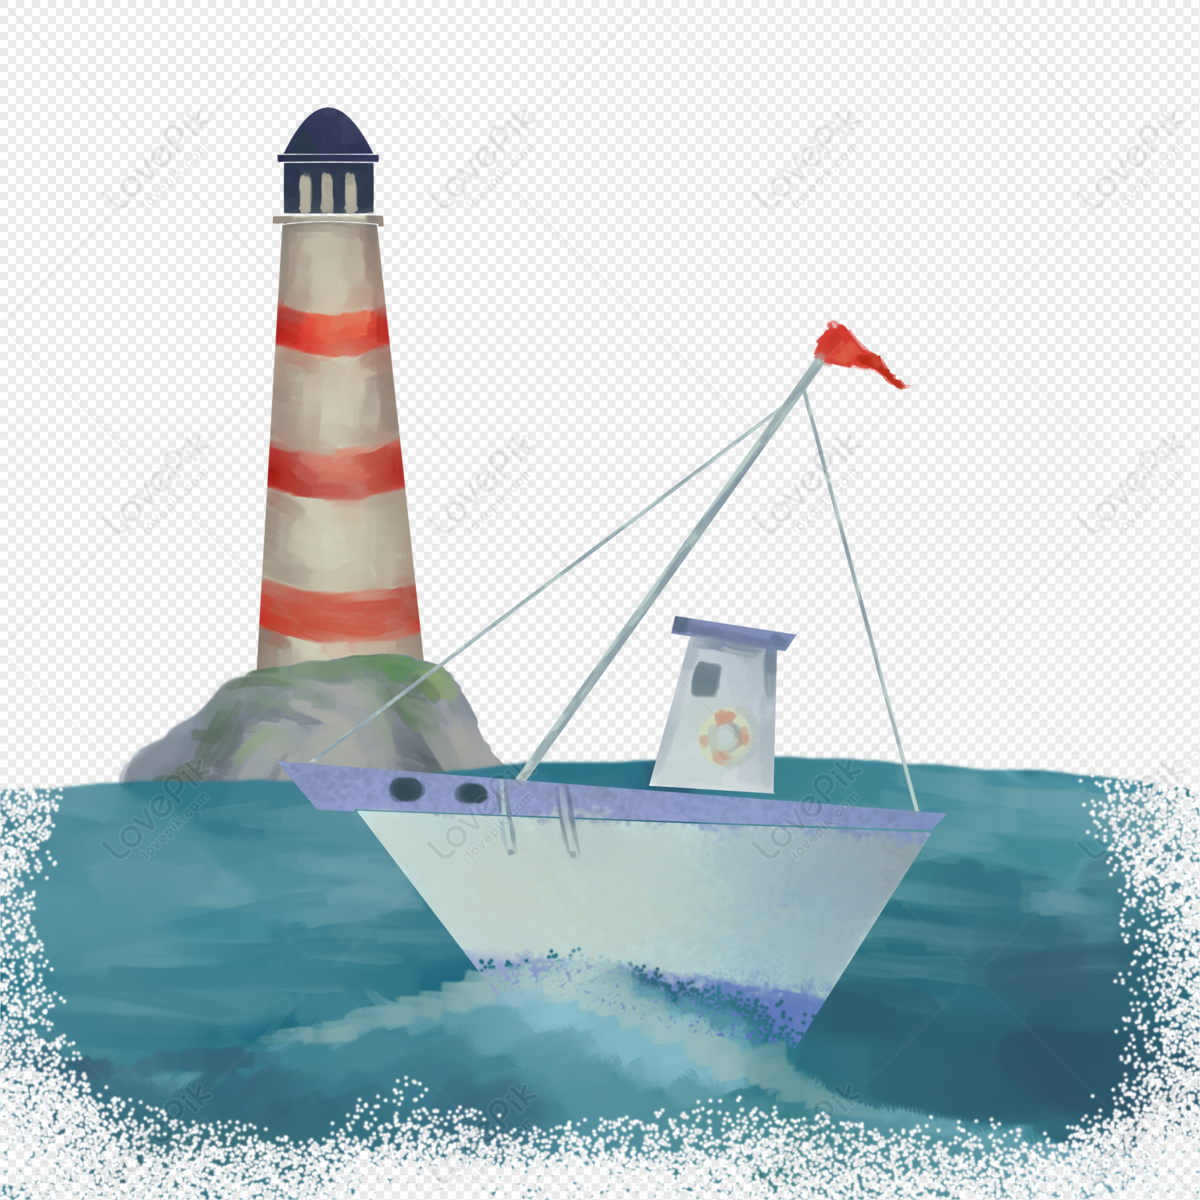 Lighthouse and cruise ship, bodie island, ocean, lighthouse png transparent background